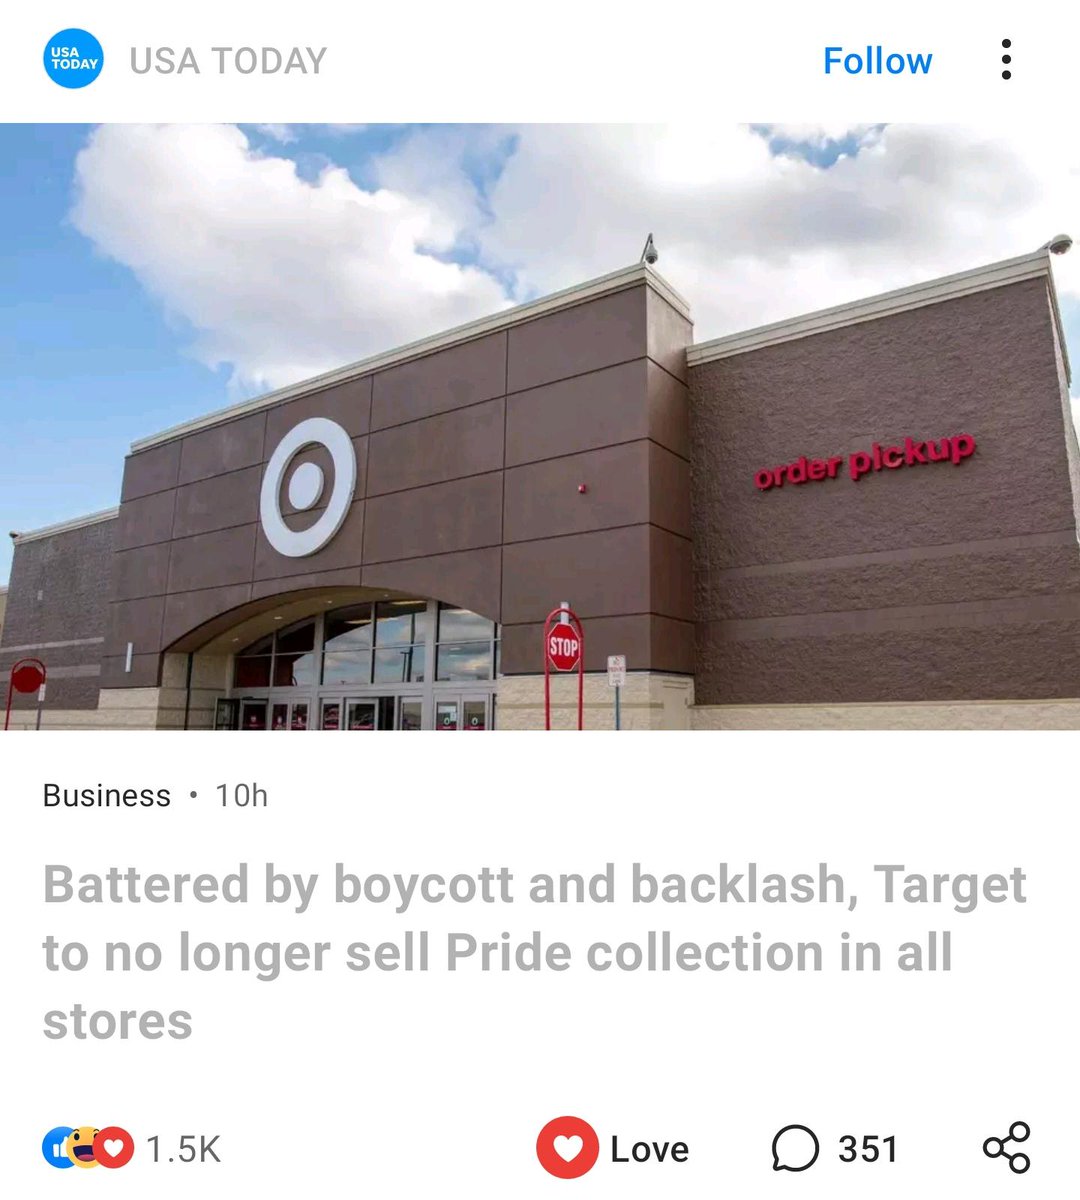 📢Battered by boycott and backlash, Target to no longer sell Pride collection in all stores.

My fellow American Patriots... WE WON!